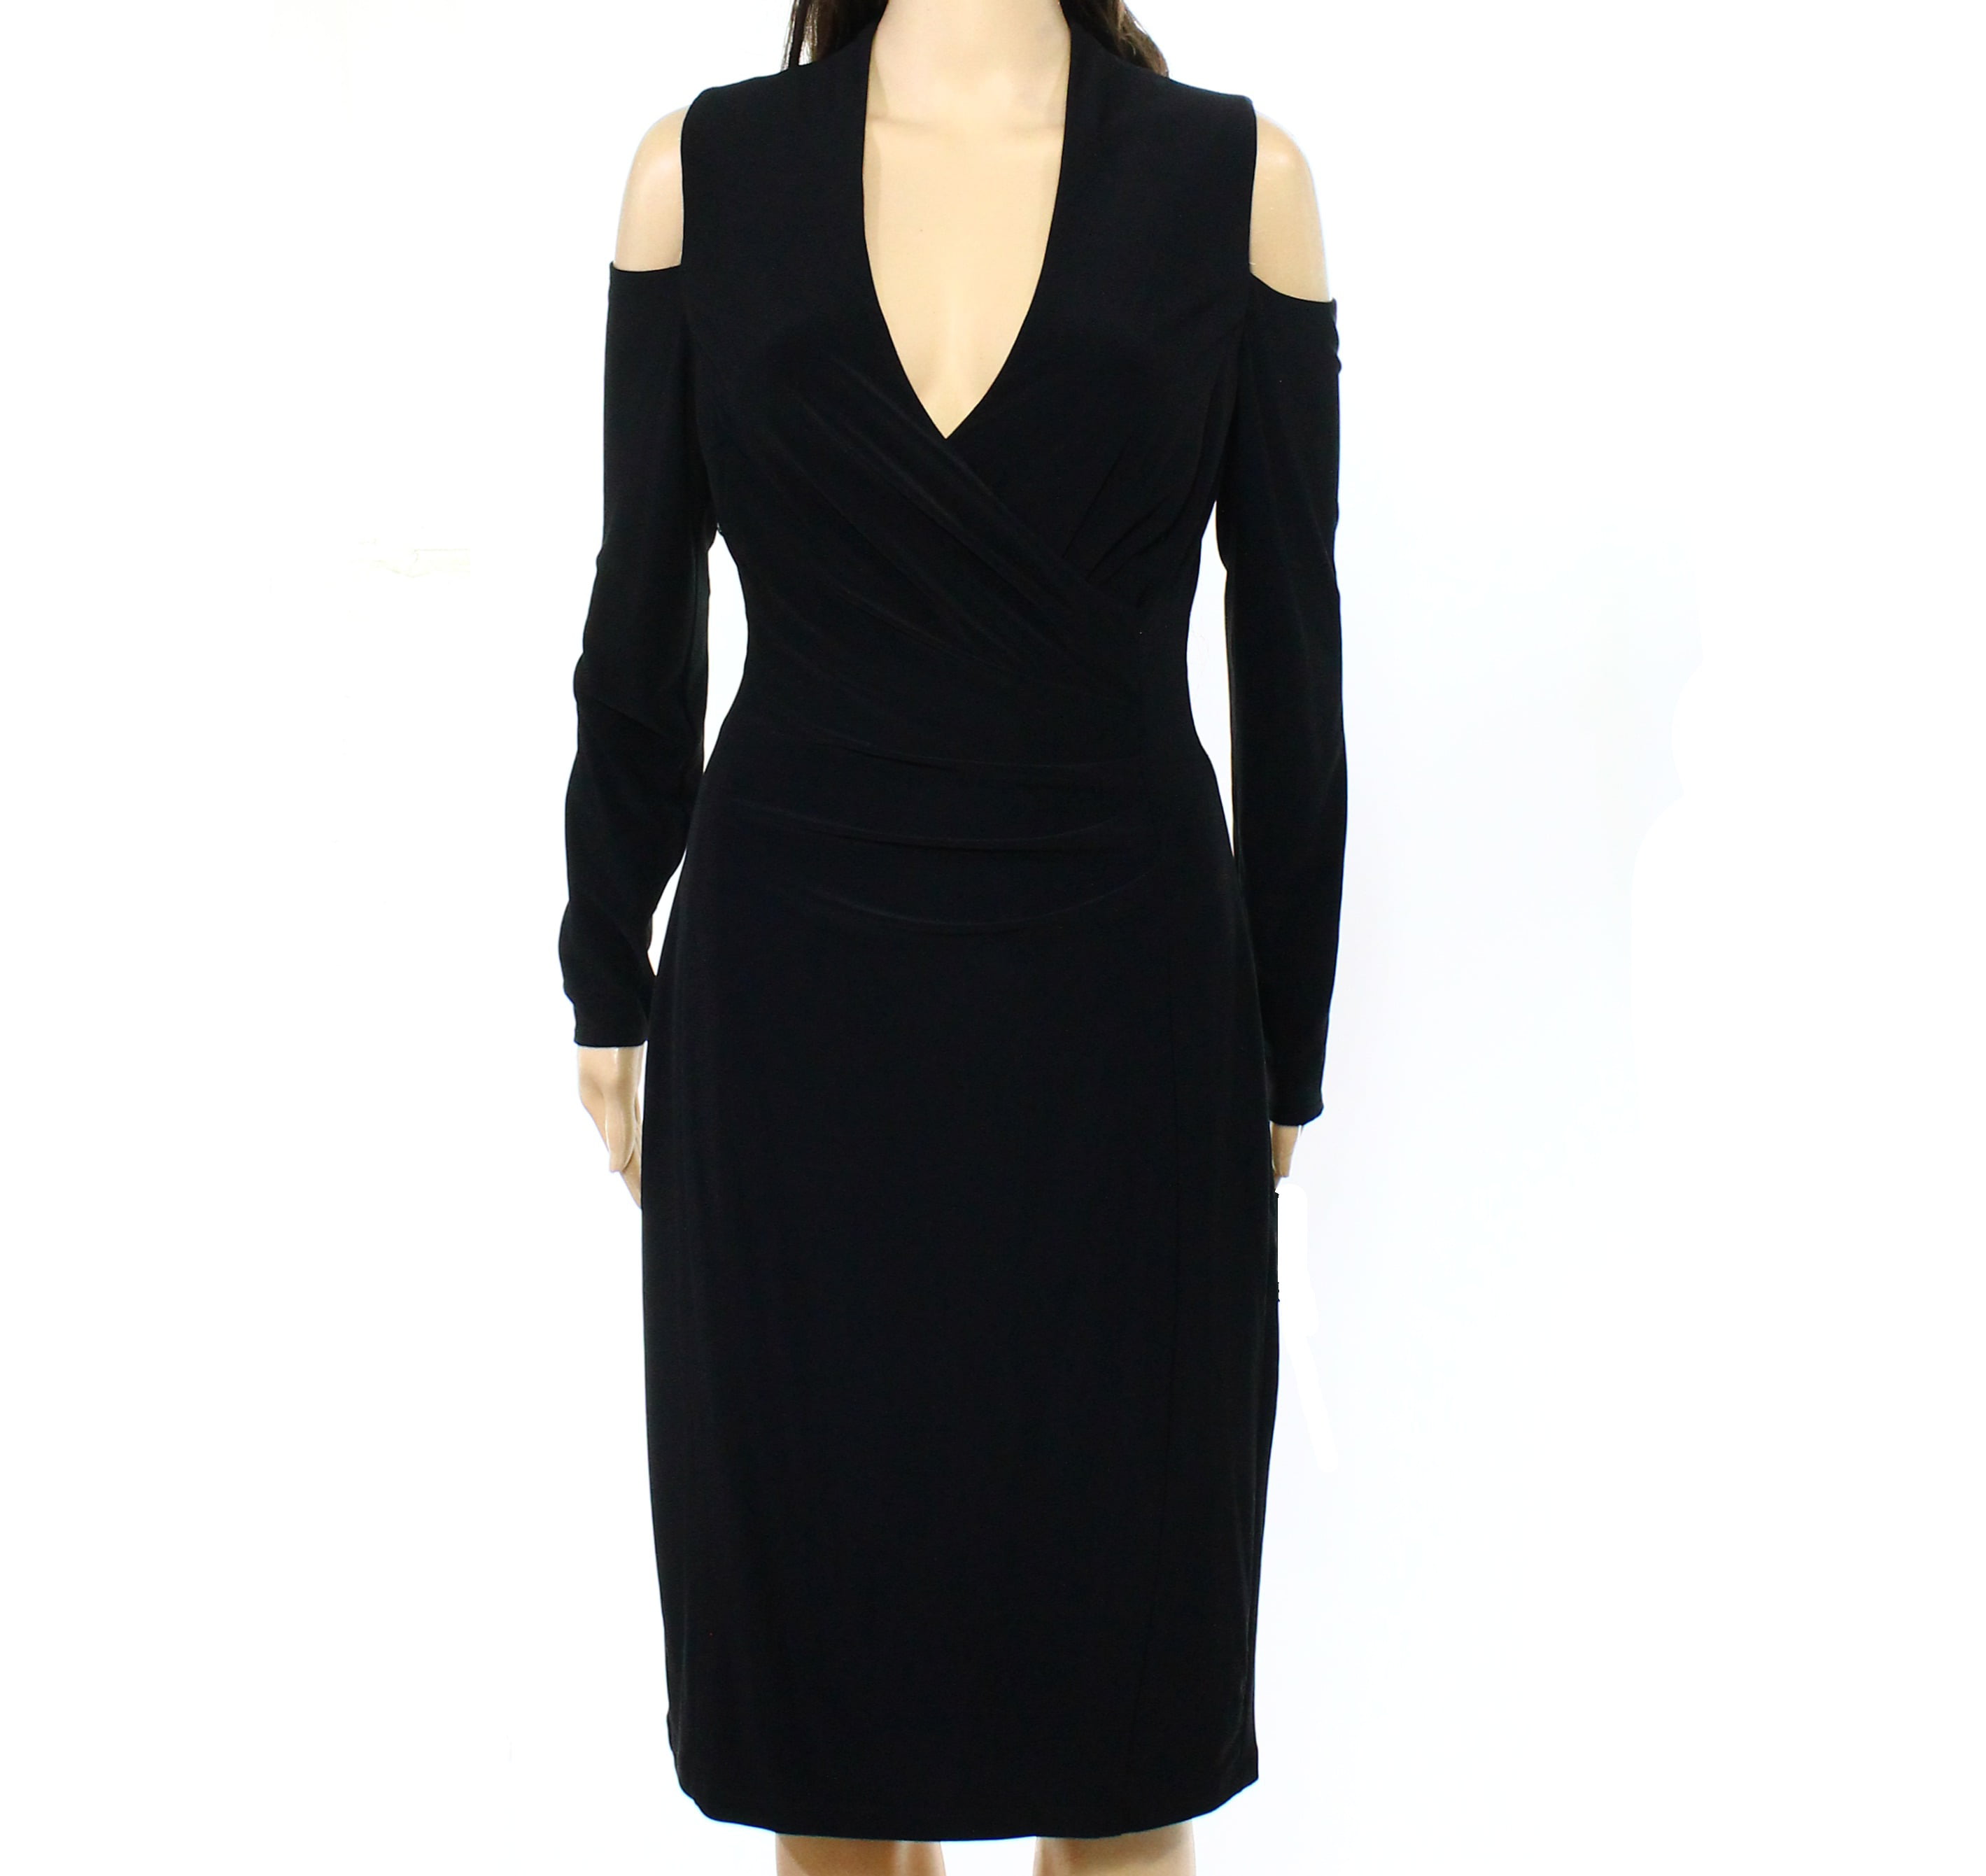 Lauren Ralph Lauren - Lauren Ralph Lauren NEW Black Womens Size 10 Cold ...